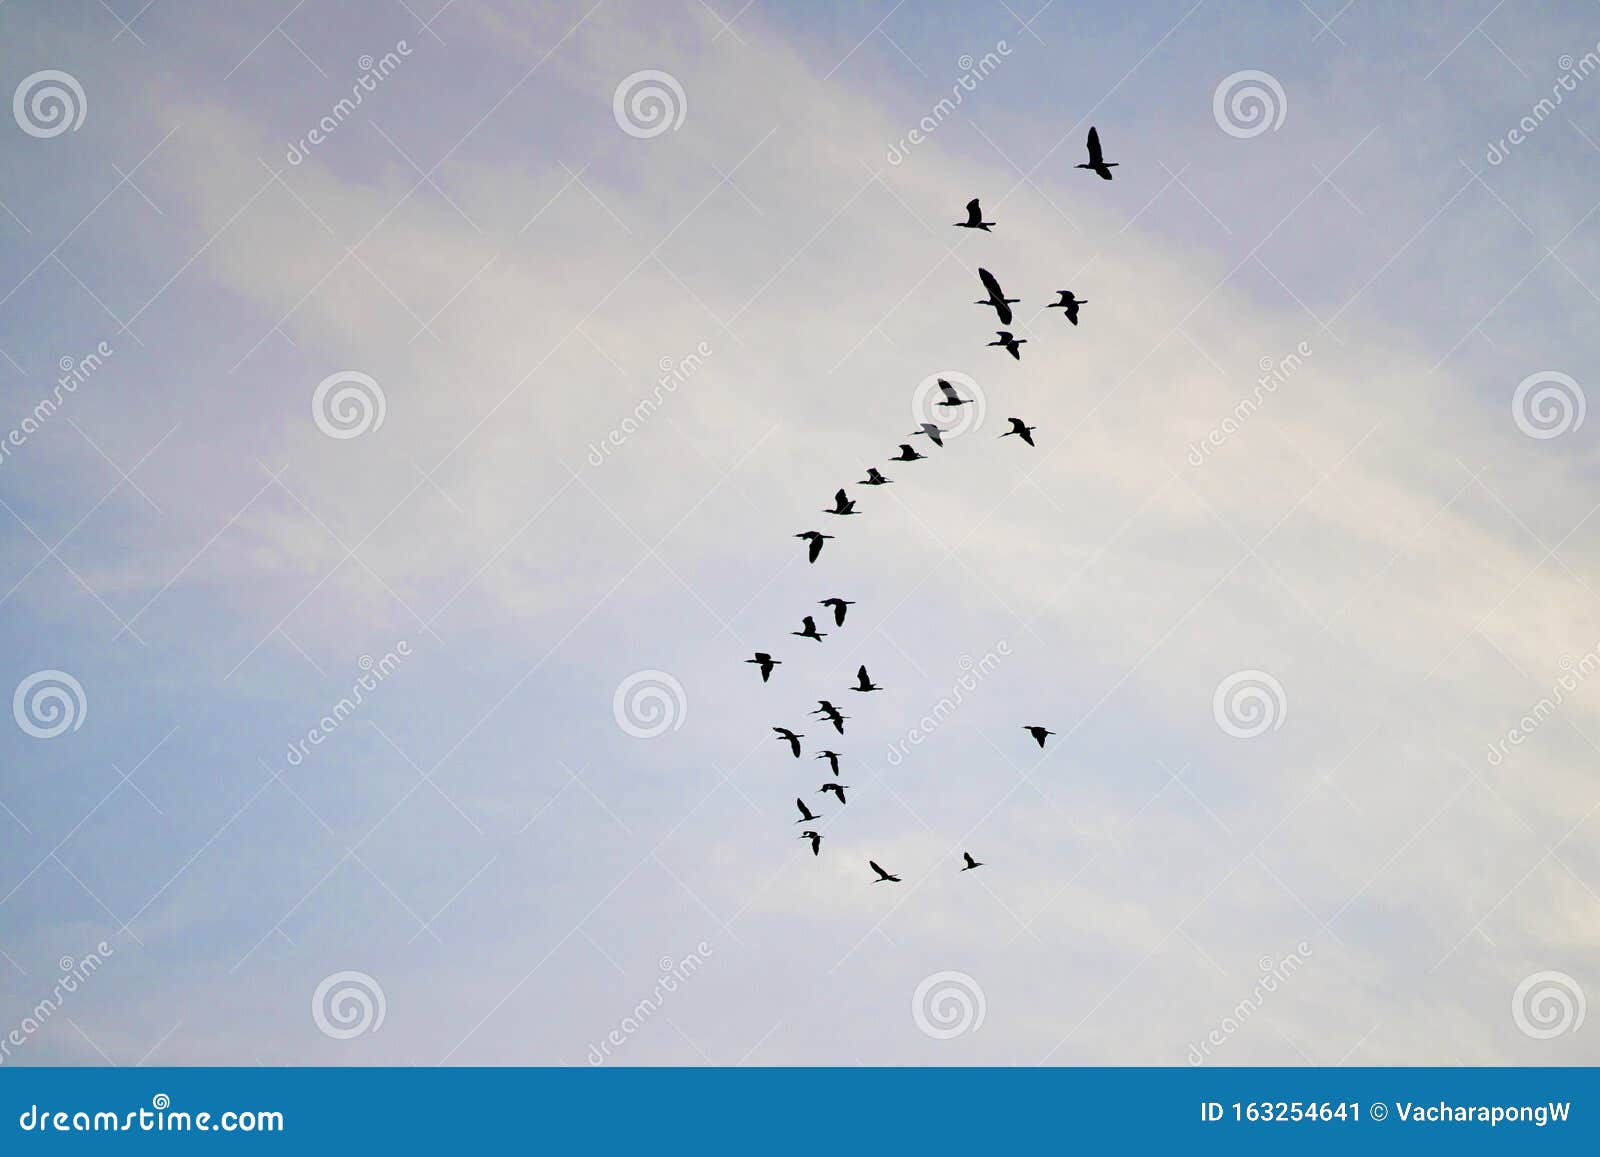 a flock of bird fly on the sky in bullish duck fly theory concept in stock market business